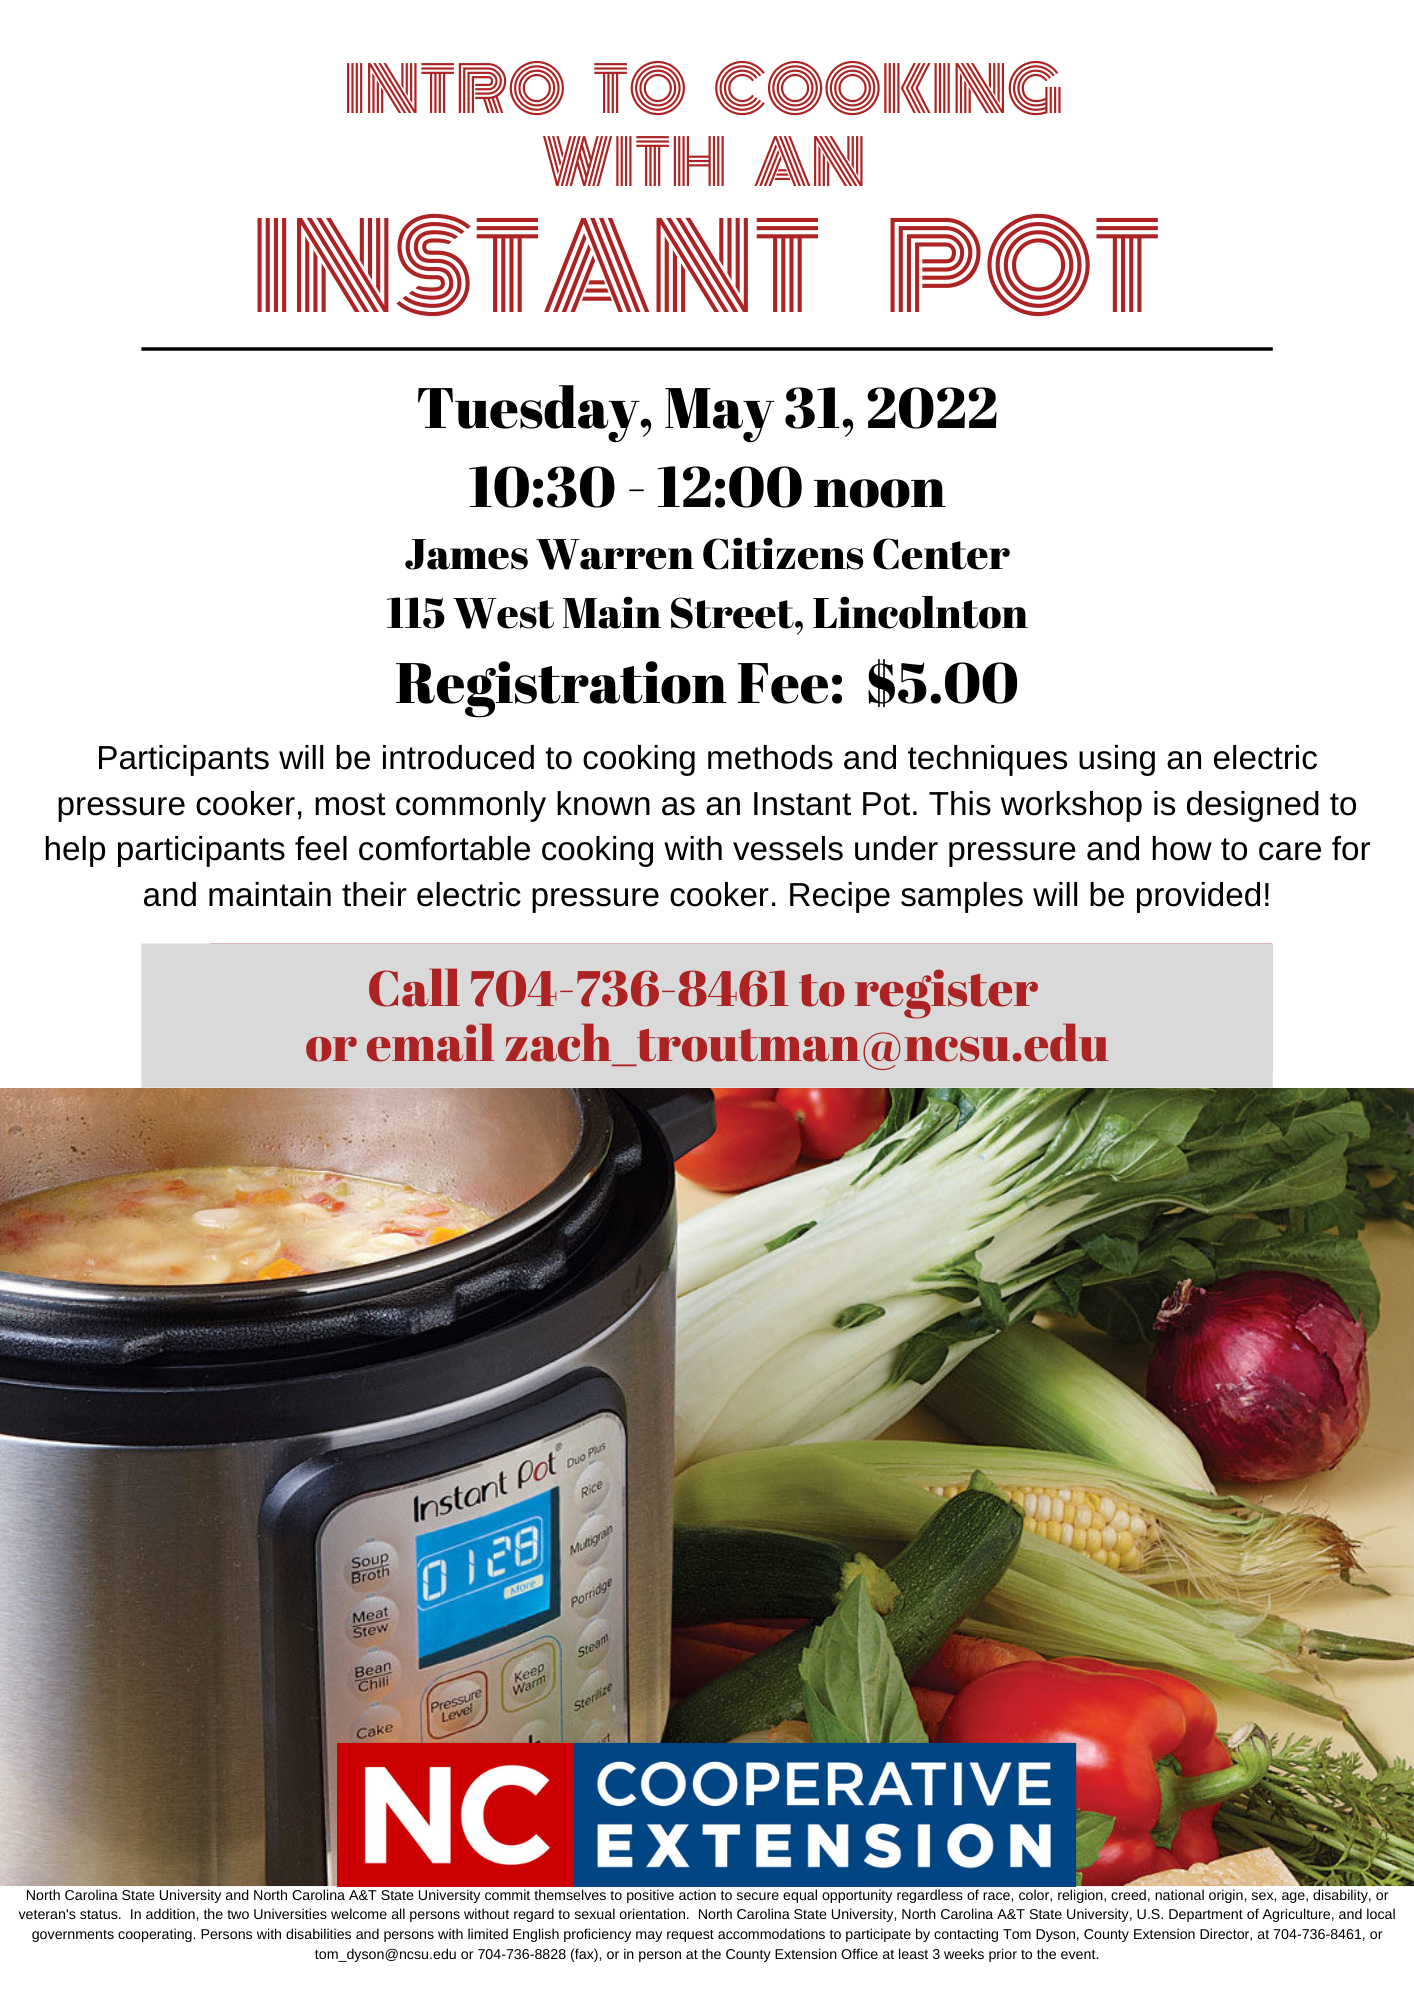 Participants will be introduced to cooking methods and techniques using an electric pressure cooker. Learn how to care for and maintain the electric pressure cooker.